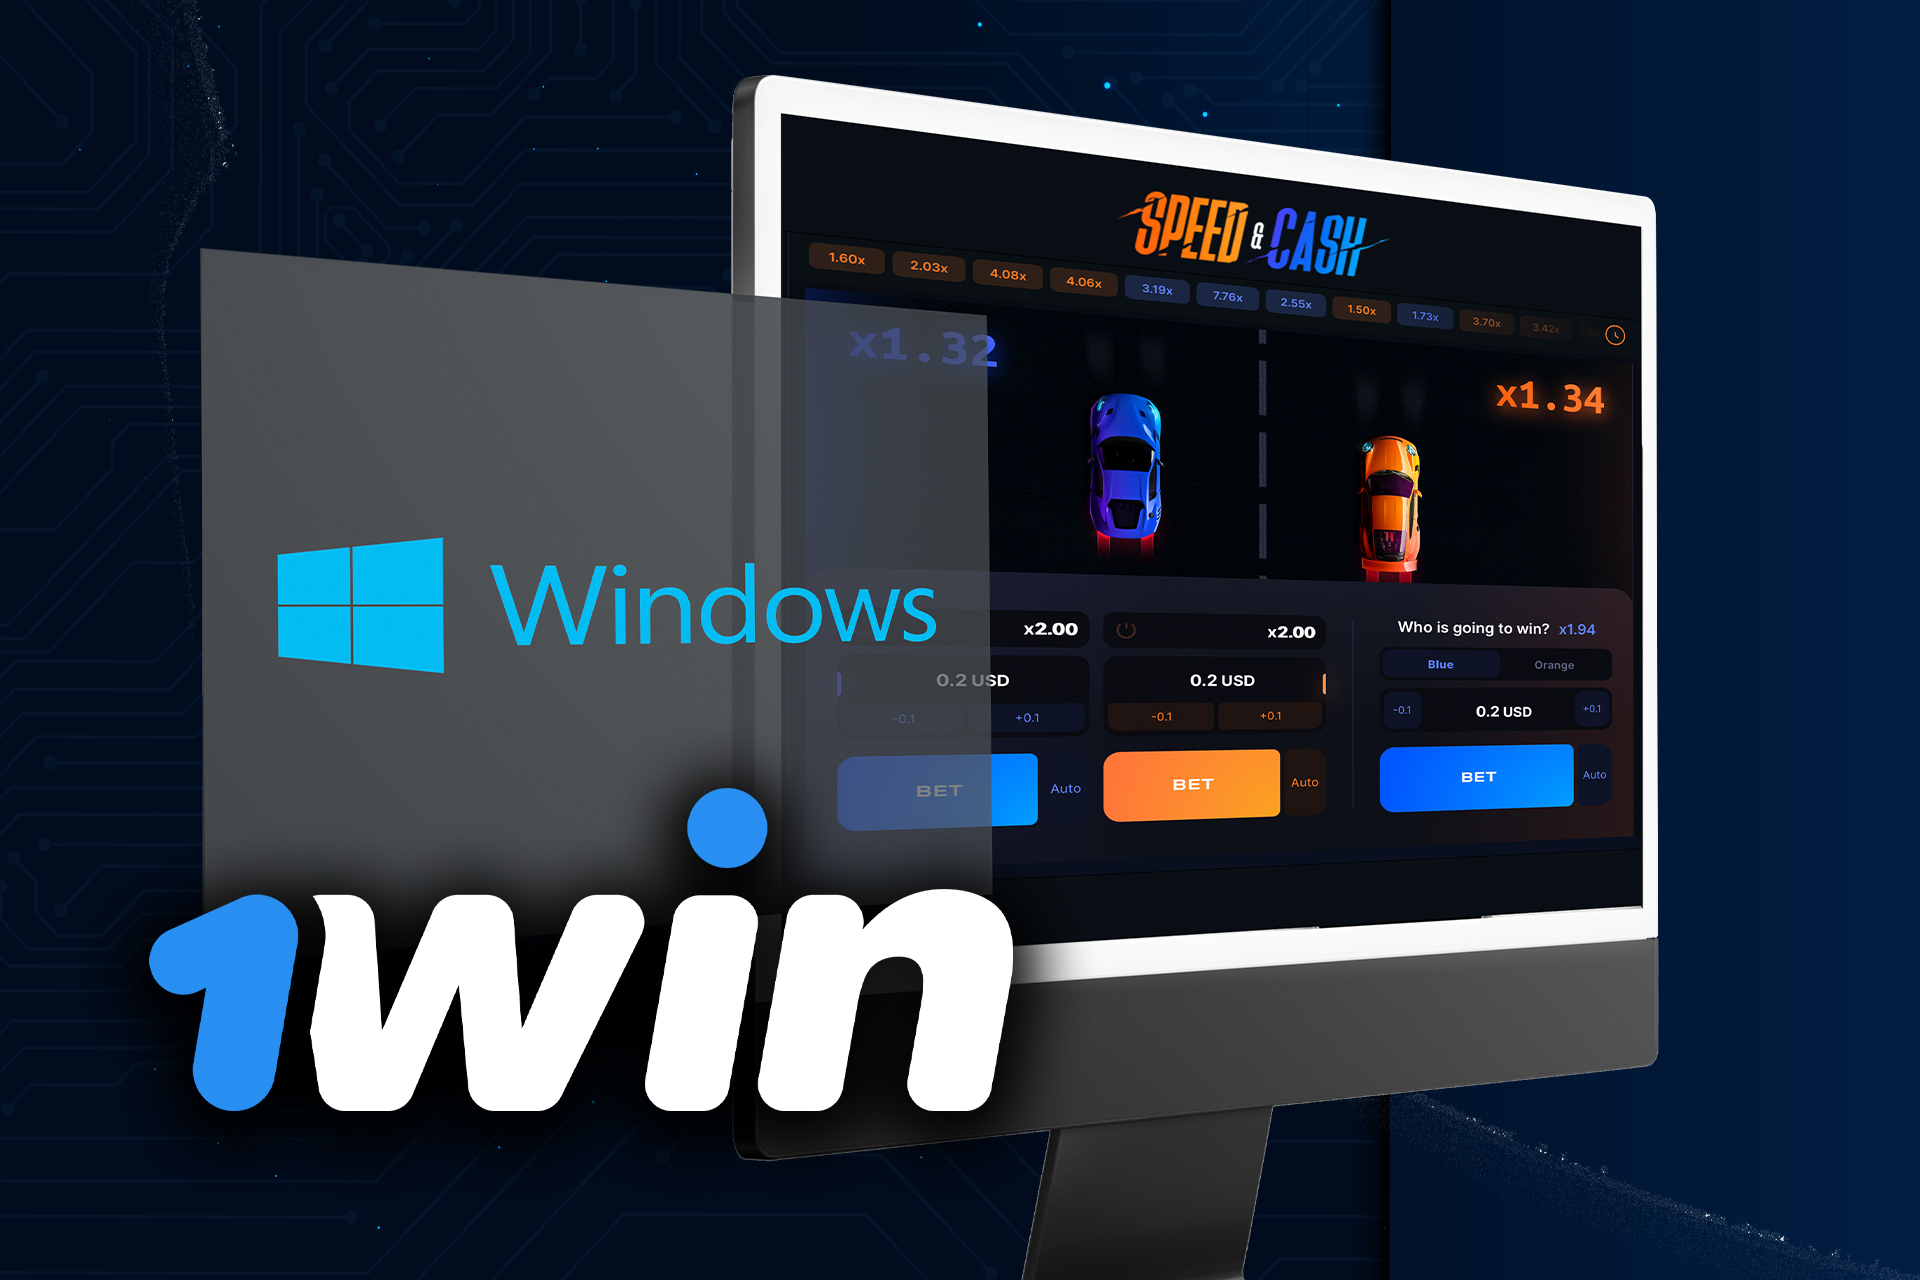 There is a desktop version of 1win that you can install on your laptop.